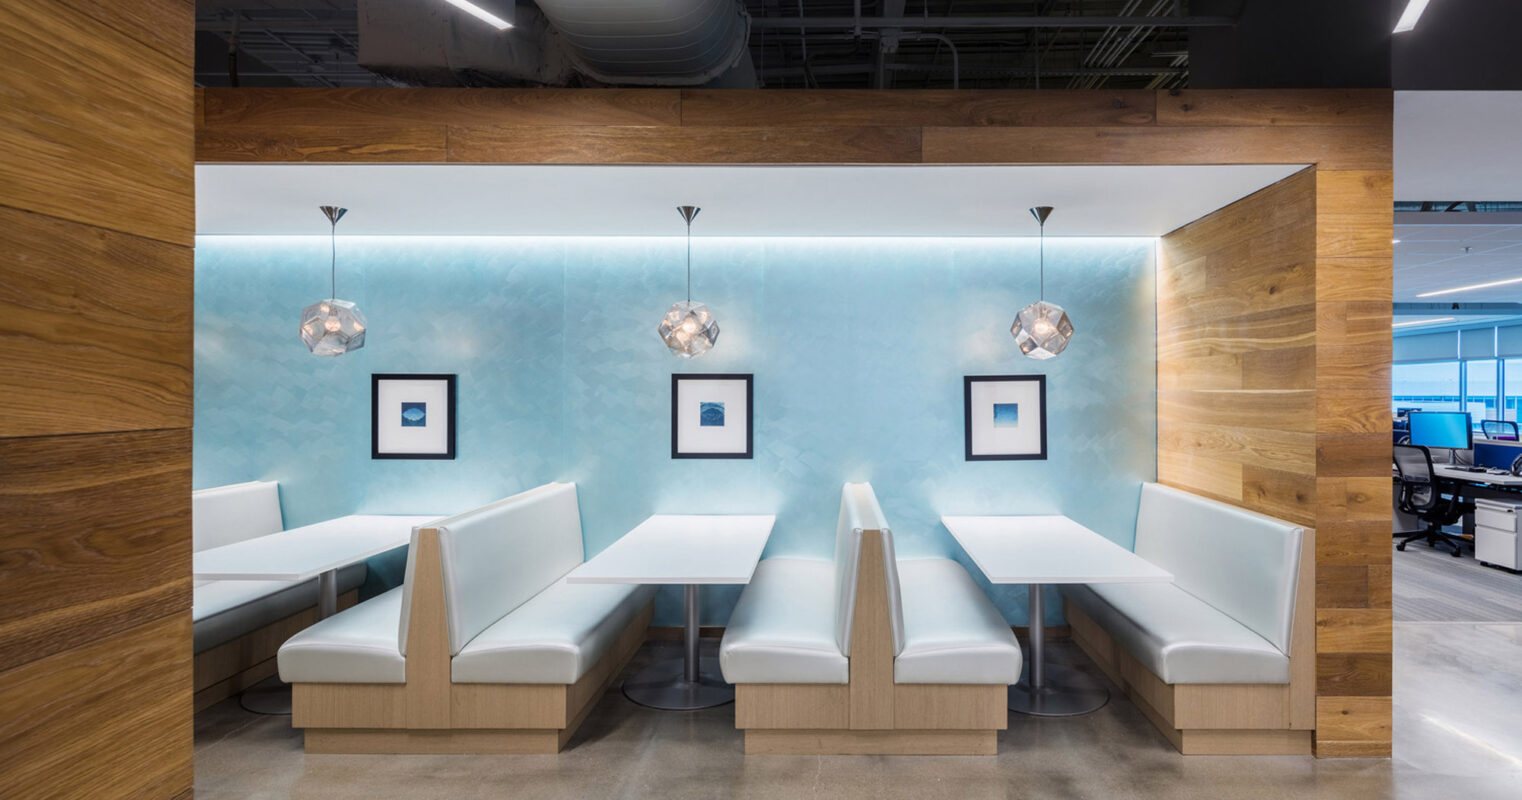 Modern office break room featuring sleek white benches, blue backlit walls, warm wooden paneling, and geometric pendant lighting, creating a fusion of coziness and contemporary design.